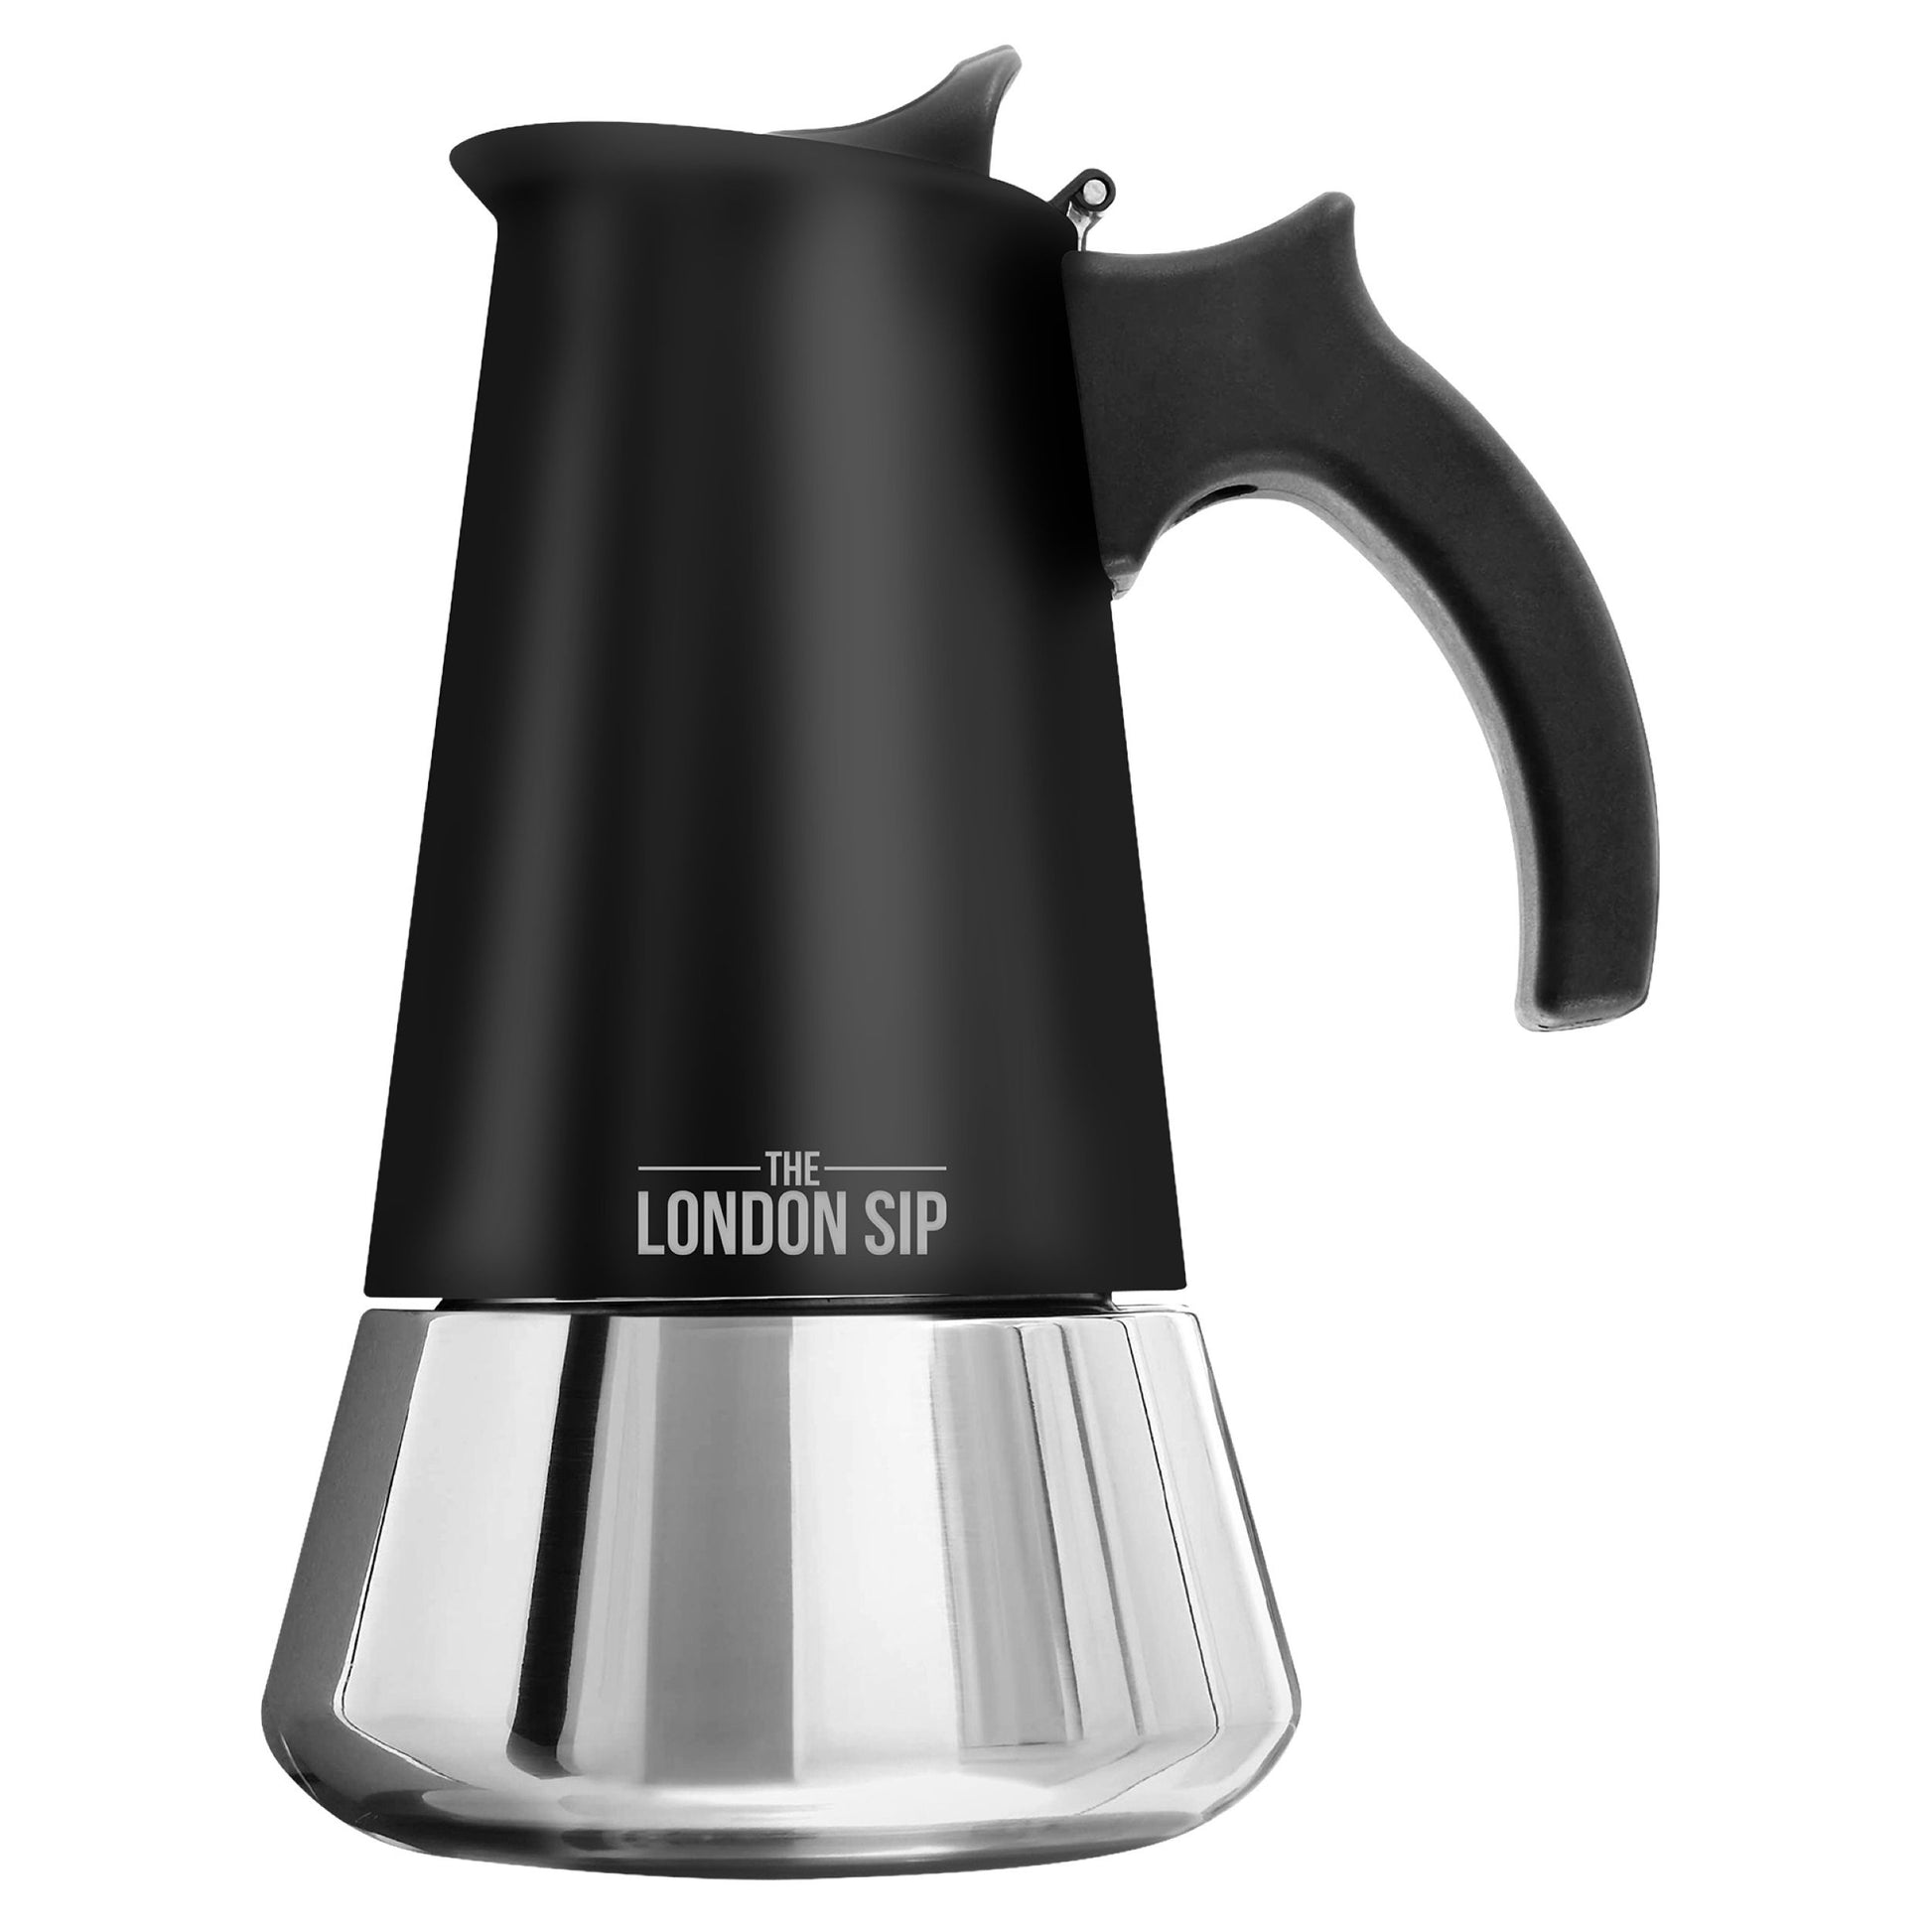 Stainless Steel Stovetop Espresso Coffee Maker – KitchenSupply